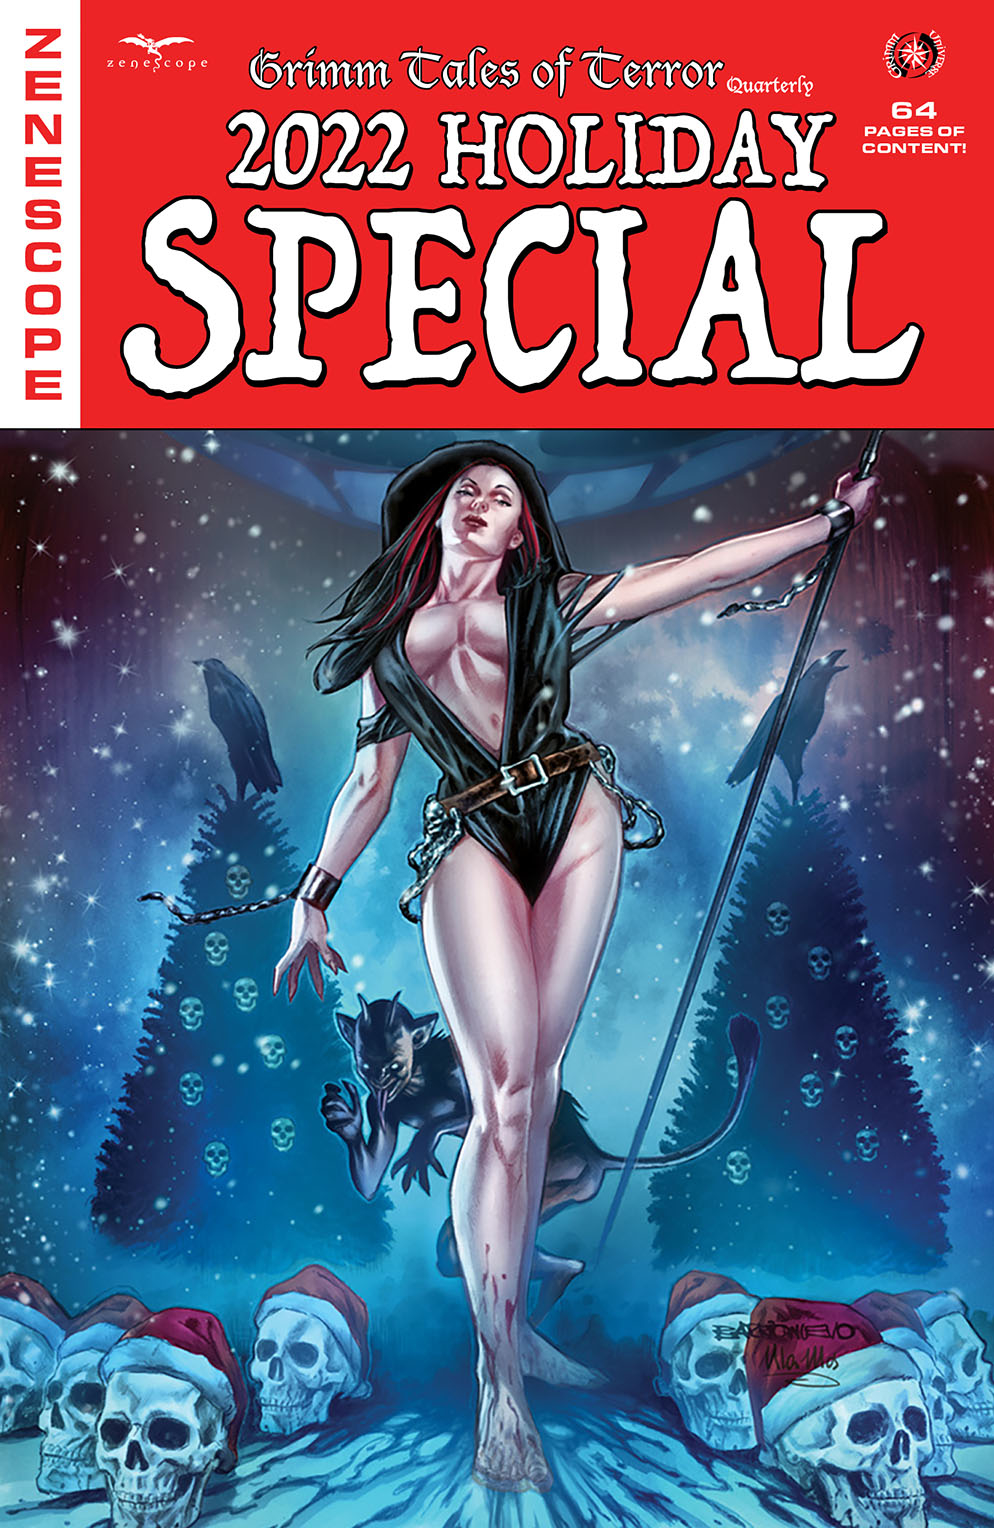 Tales of Terror Quarterly 2022 Holiday Special Volume 1 Cover A Barrionuevo